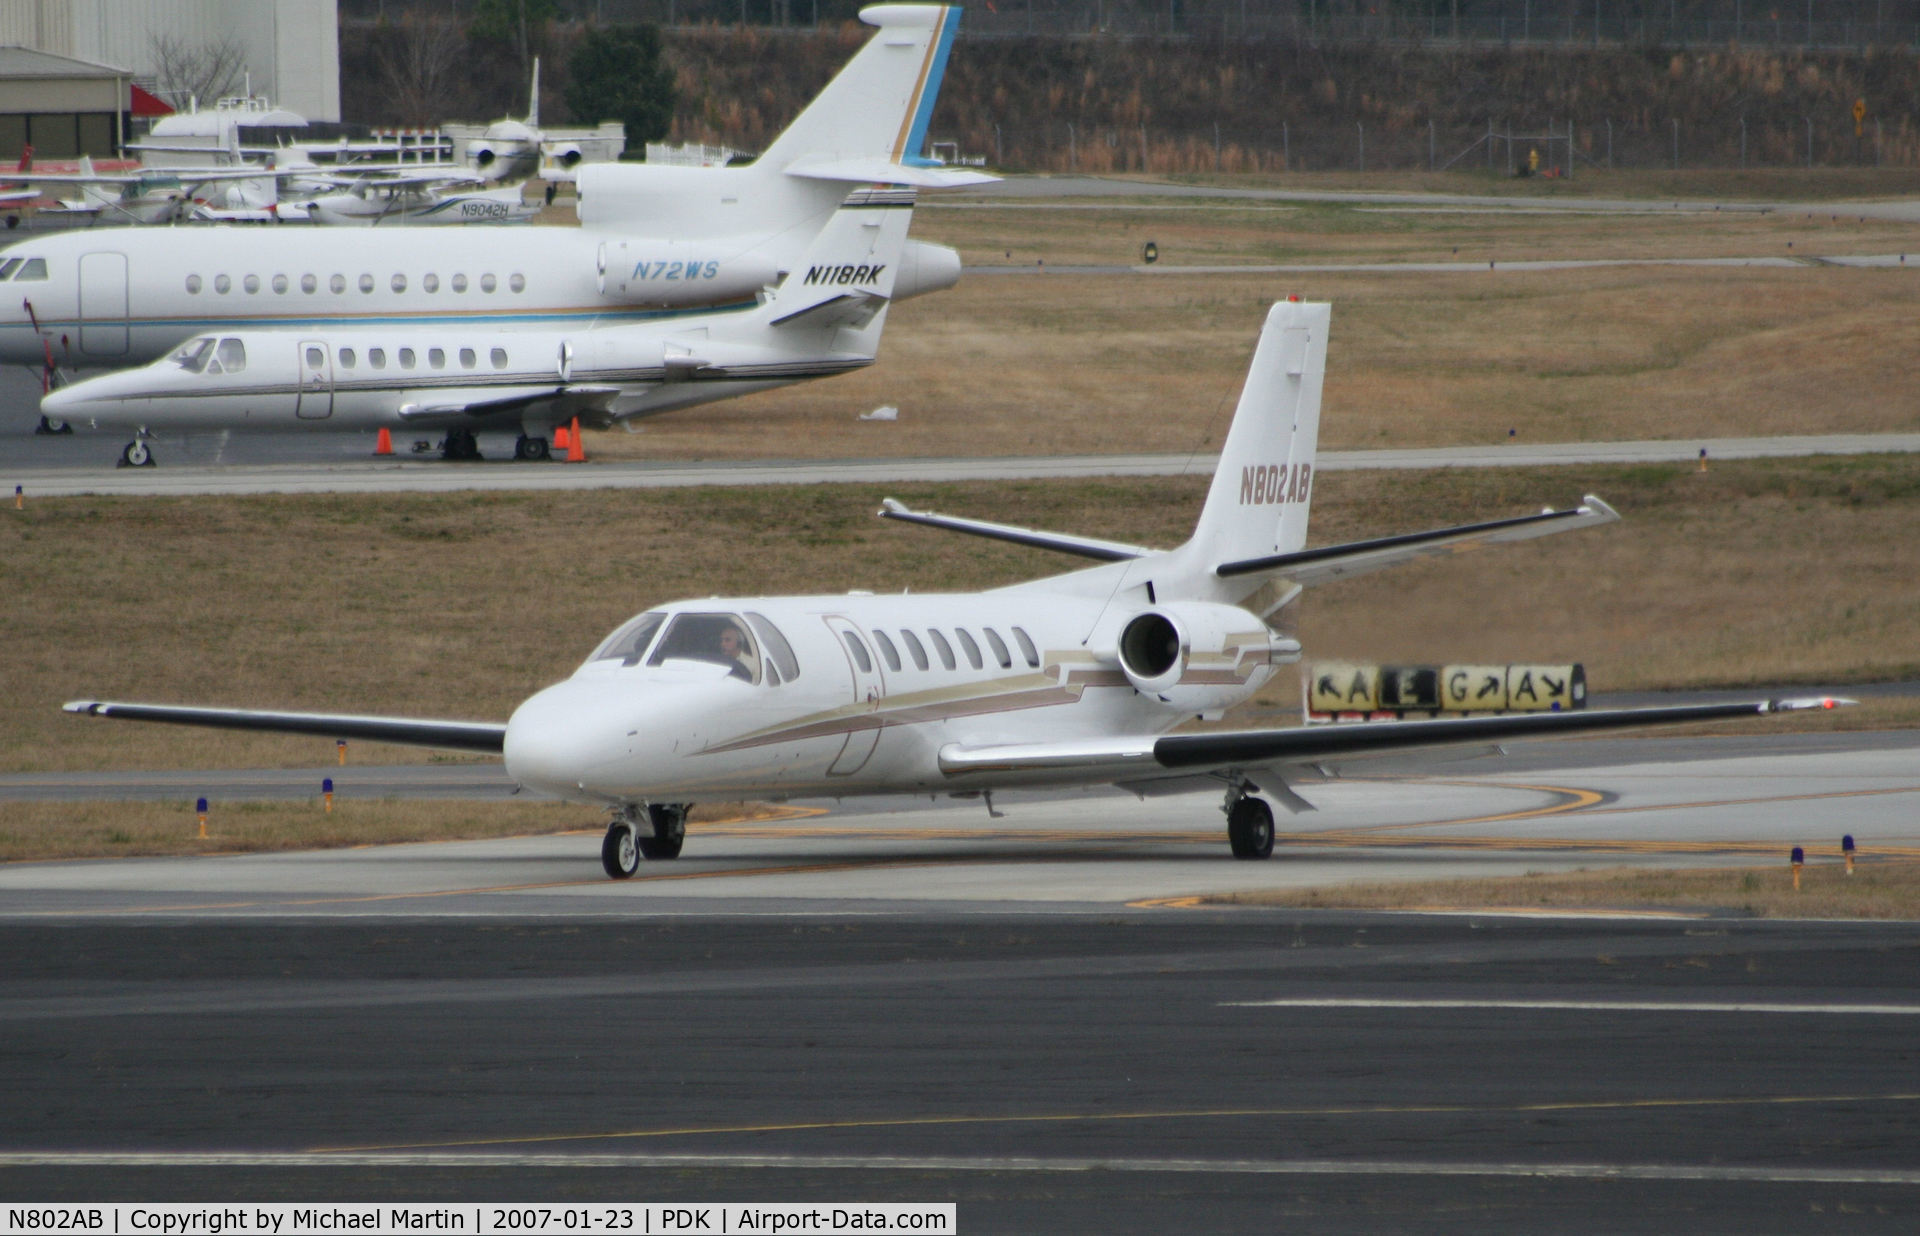 N802AB, 1993 Cessna 560 Citation V C/N 560-0217, Taxing to Epps Air Service